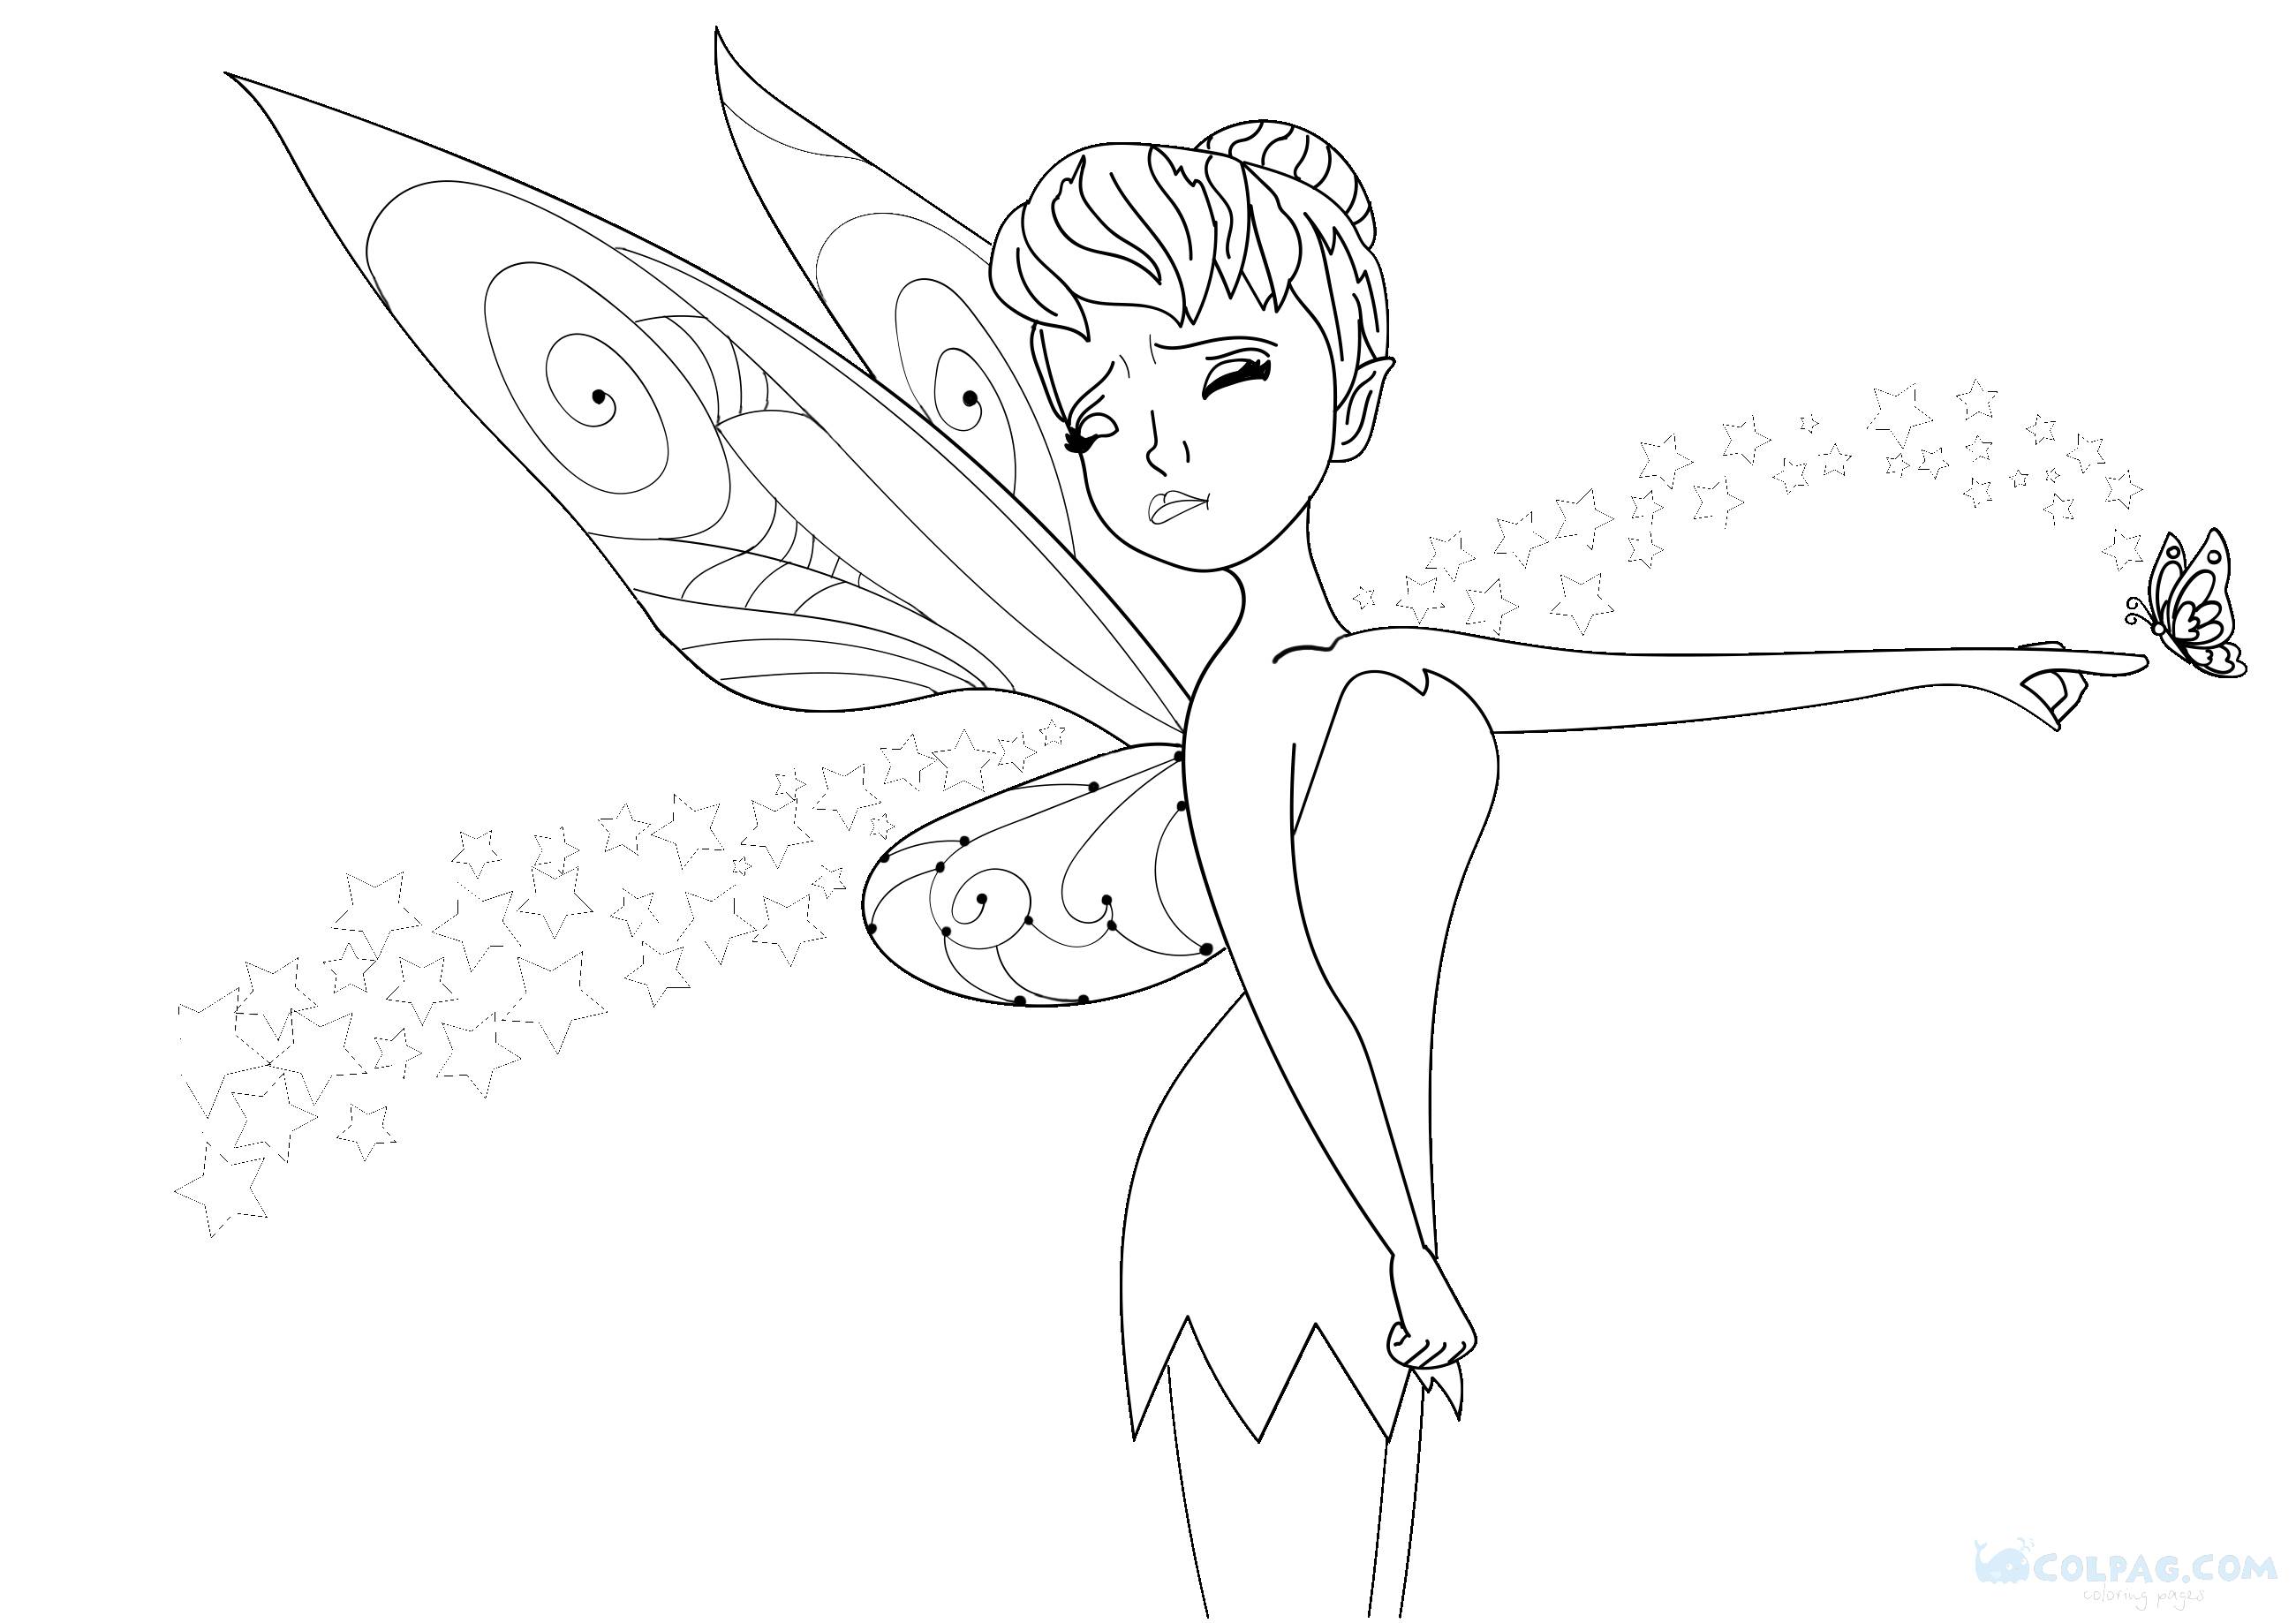 tinkerbell-coloring-page-colpag-com-7